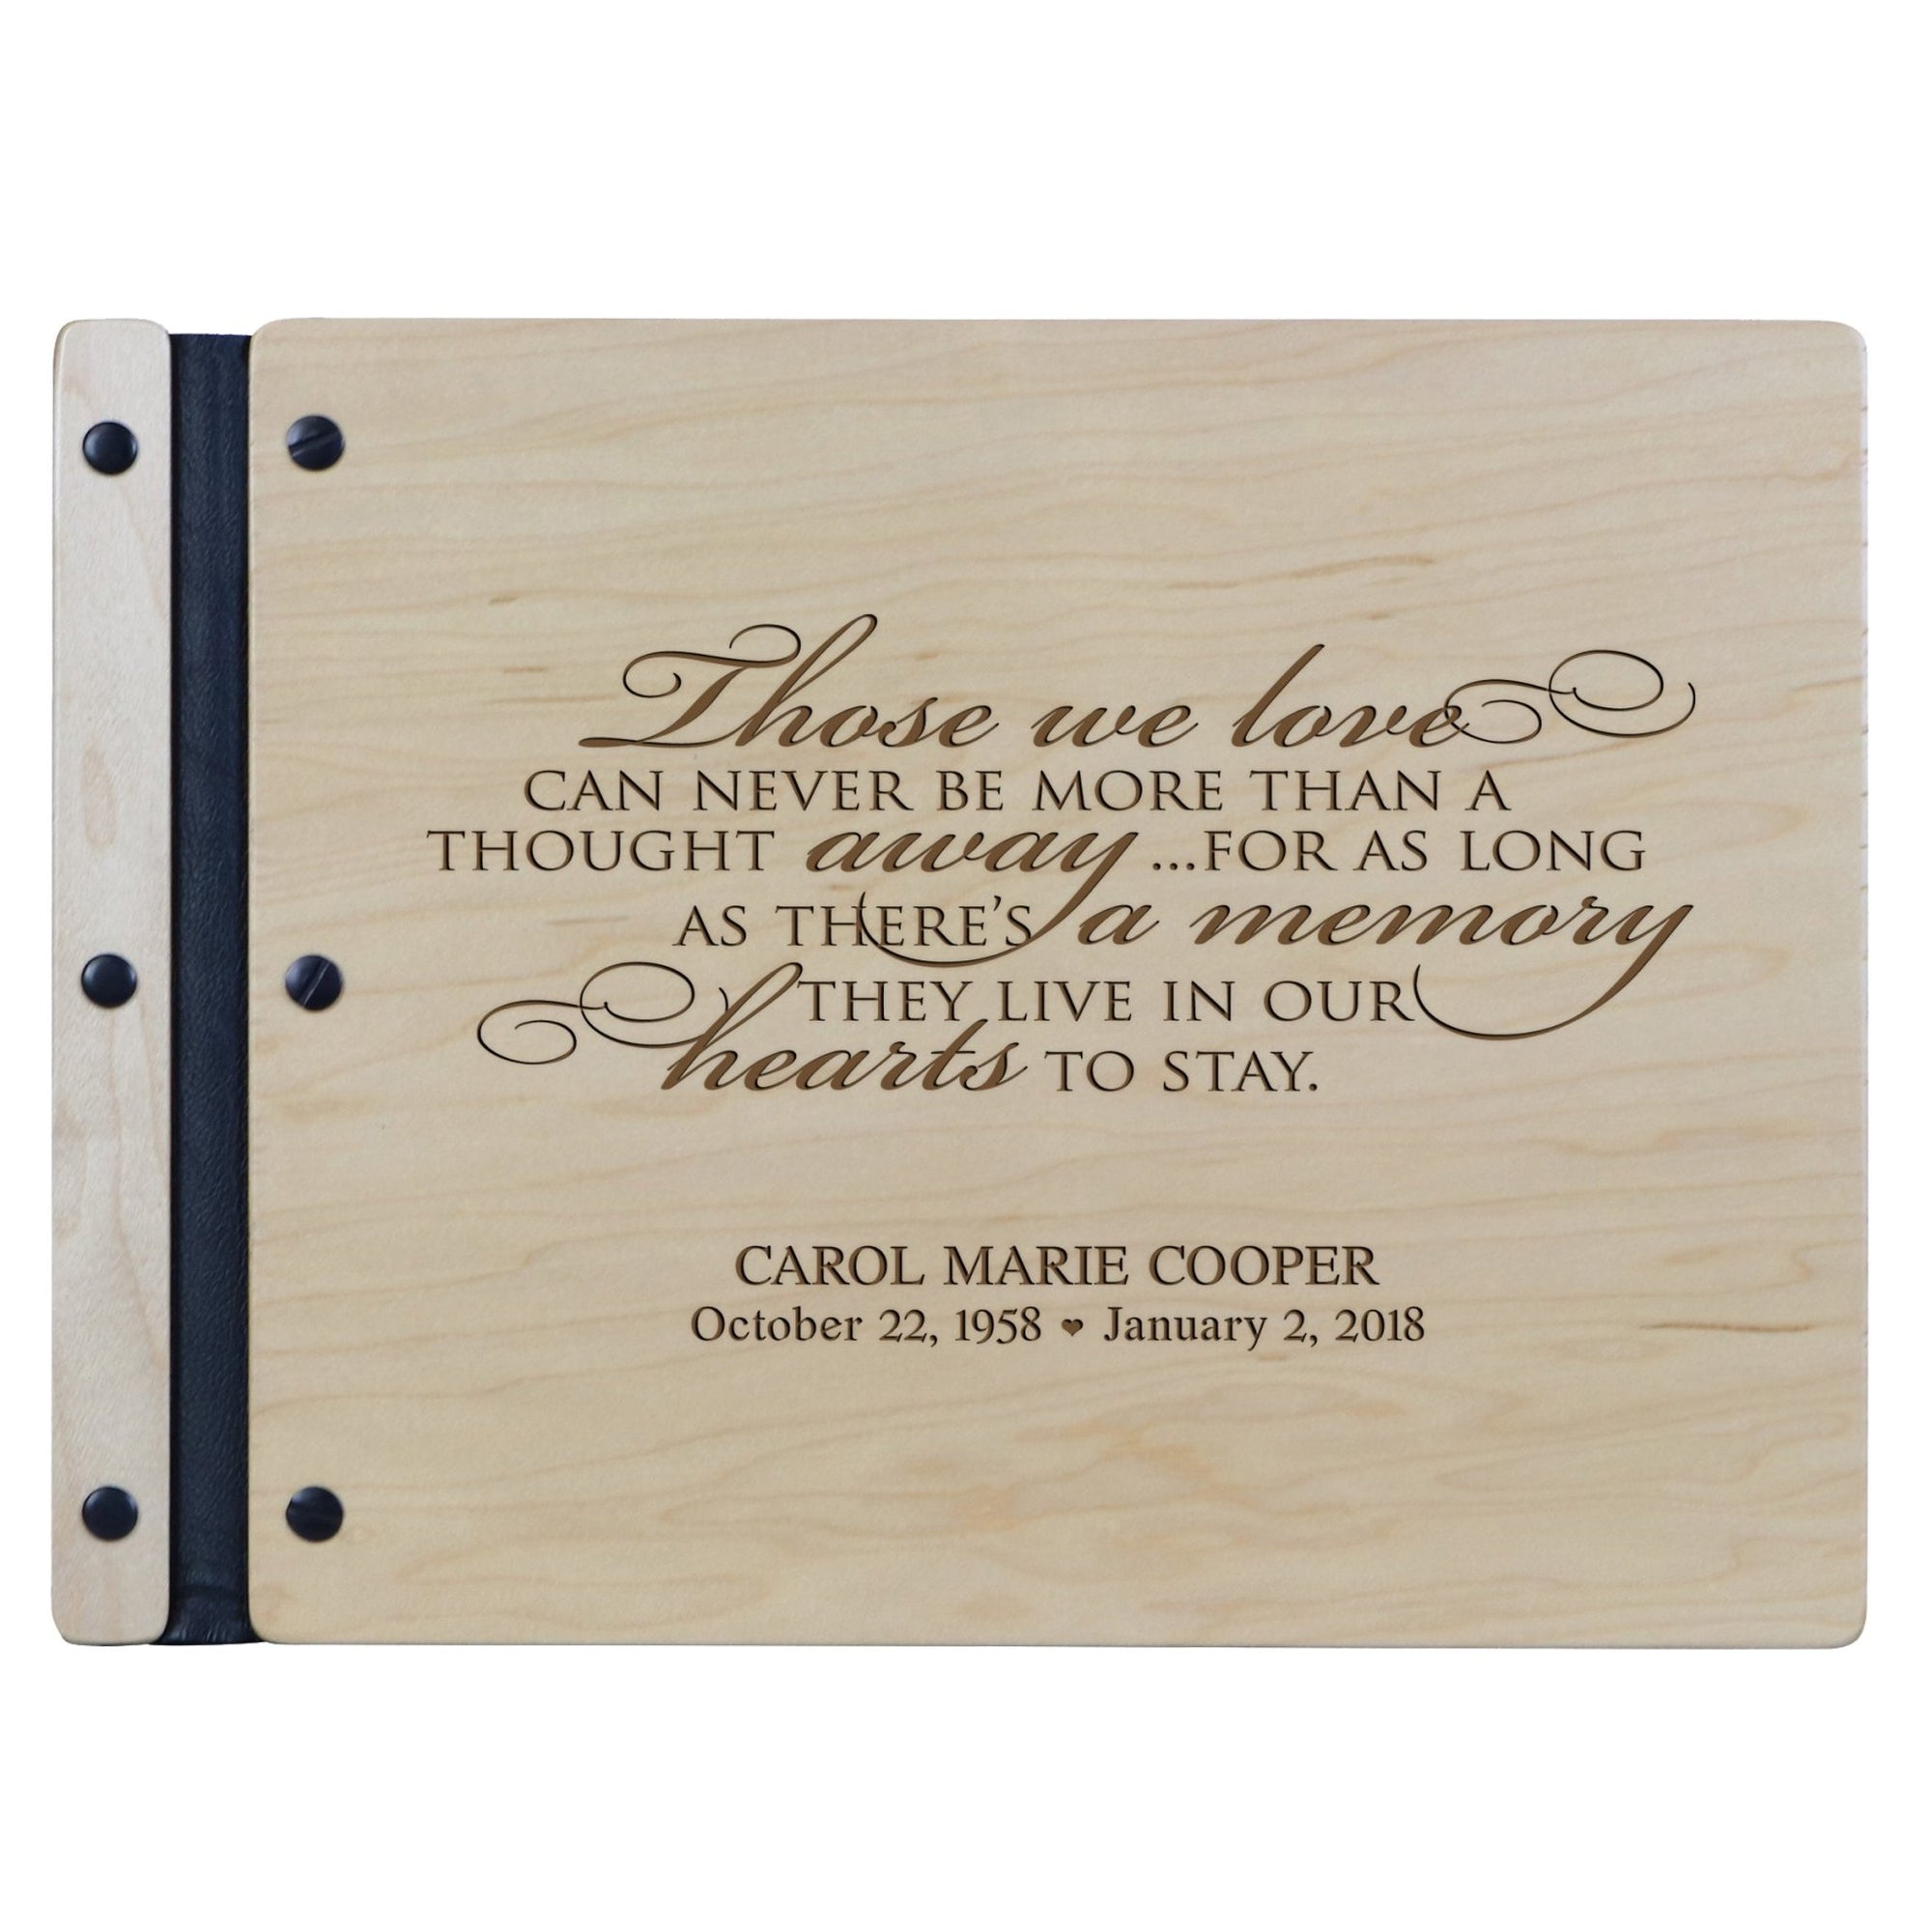 Personalized Memorial Guest Book - Those We Love - LifeSong Milestones